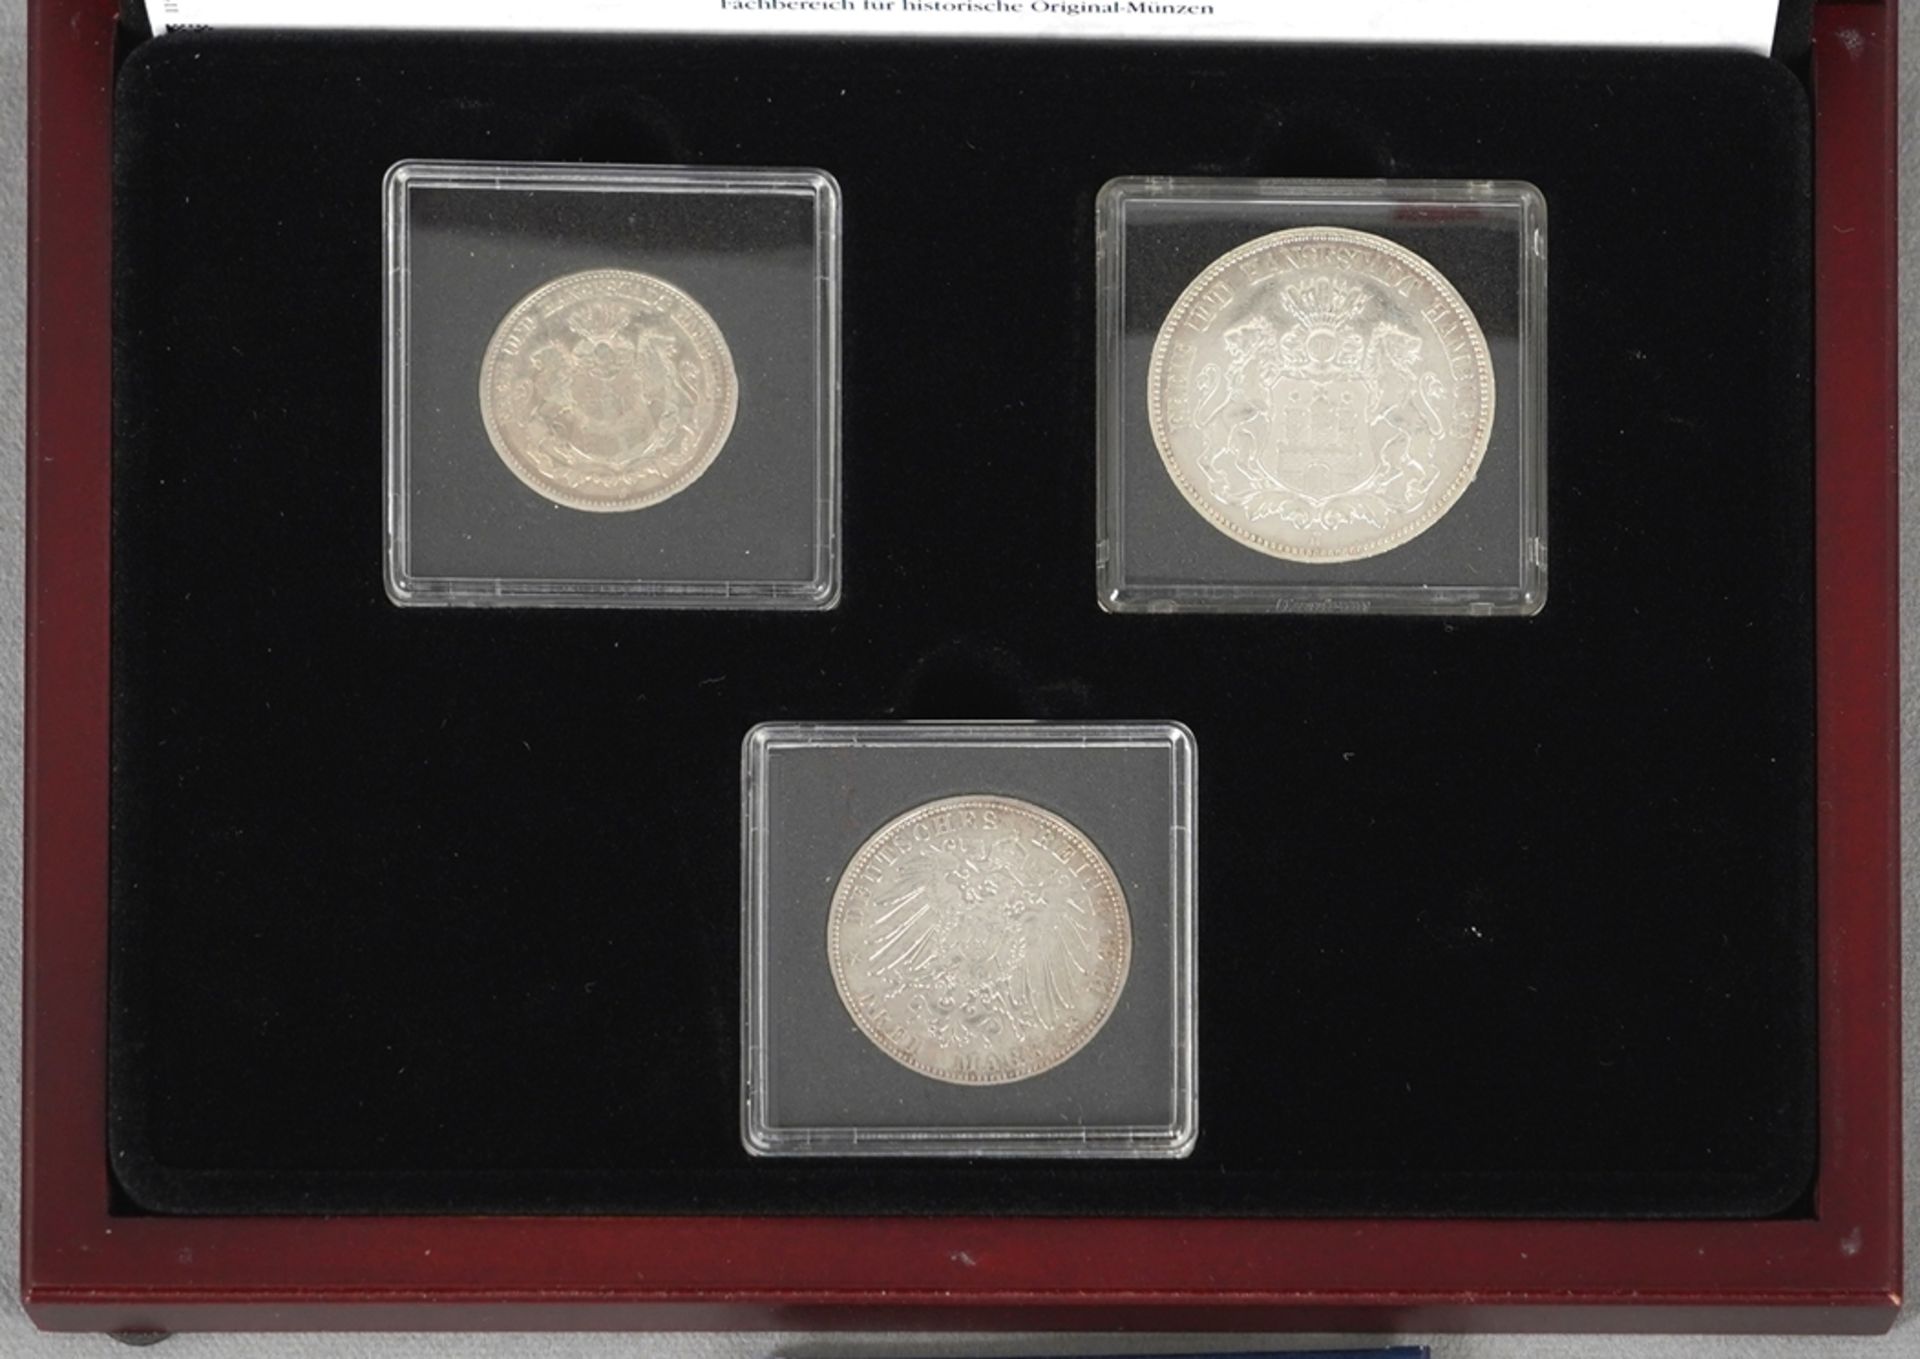 Collection Coins Empire to III Reich - Image 2 of 2